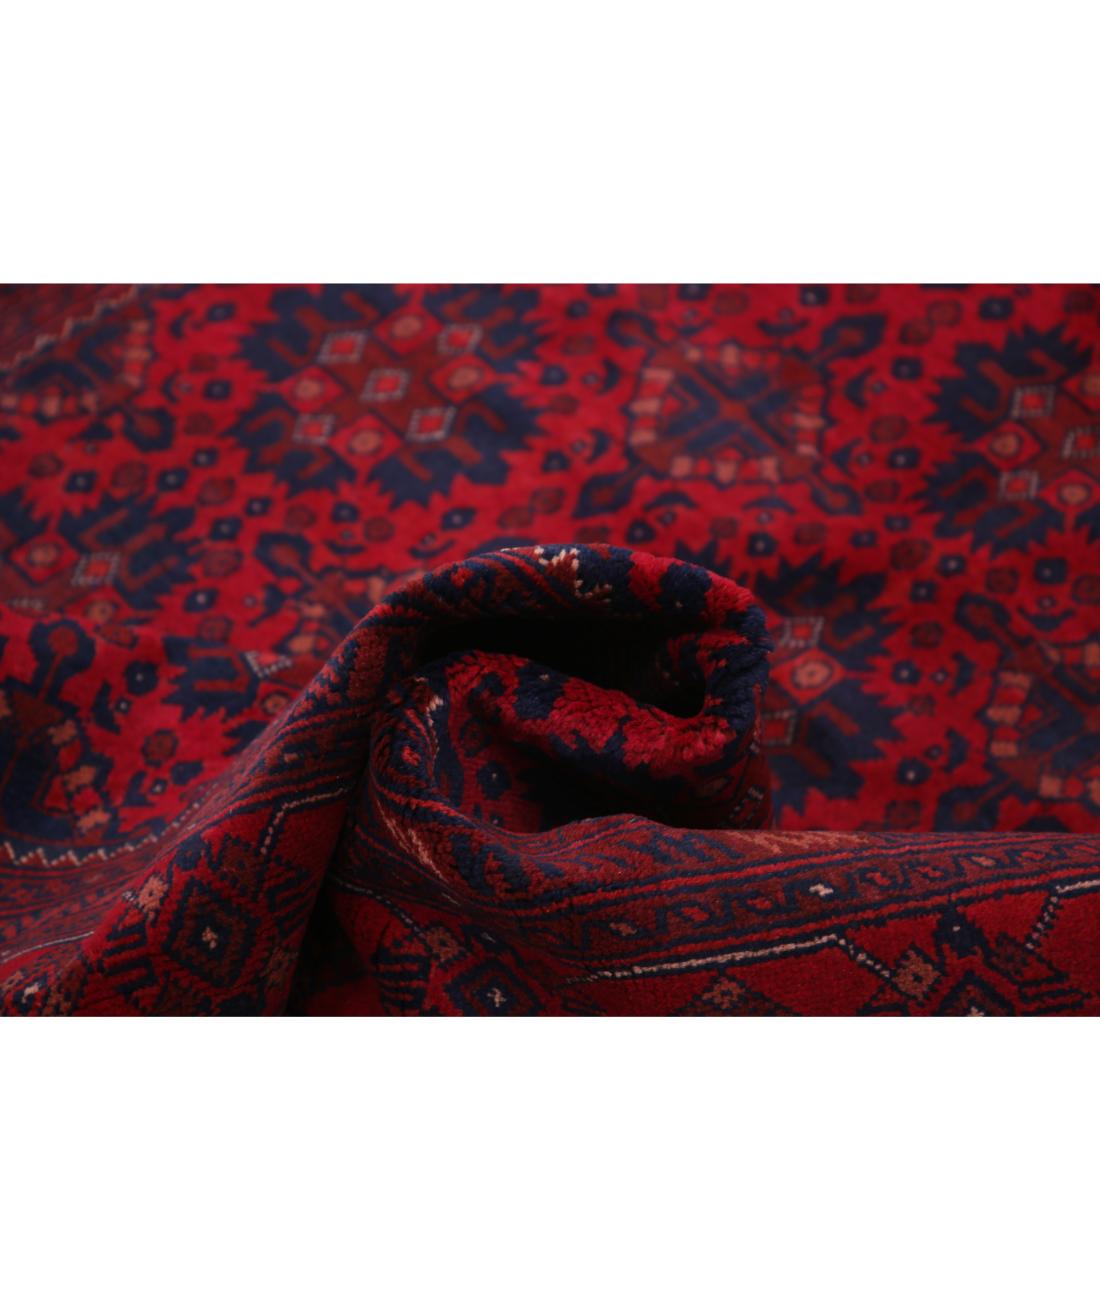 Hand Knotted Afghan Khal Muhammadi Wool Rug - 4'11'' x 6'4'' 4' 11" X 6' 4" (150 X 193) / Red / Blue